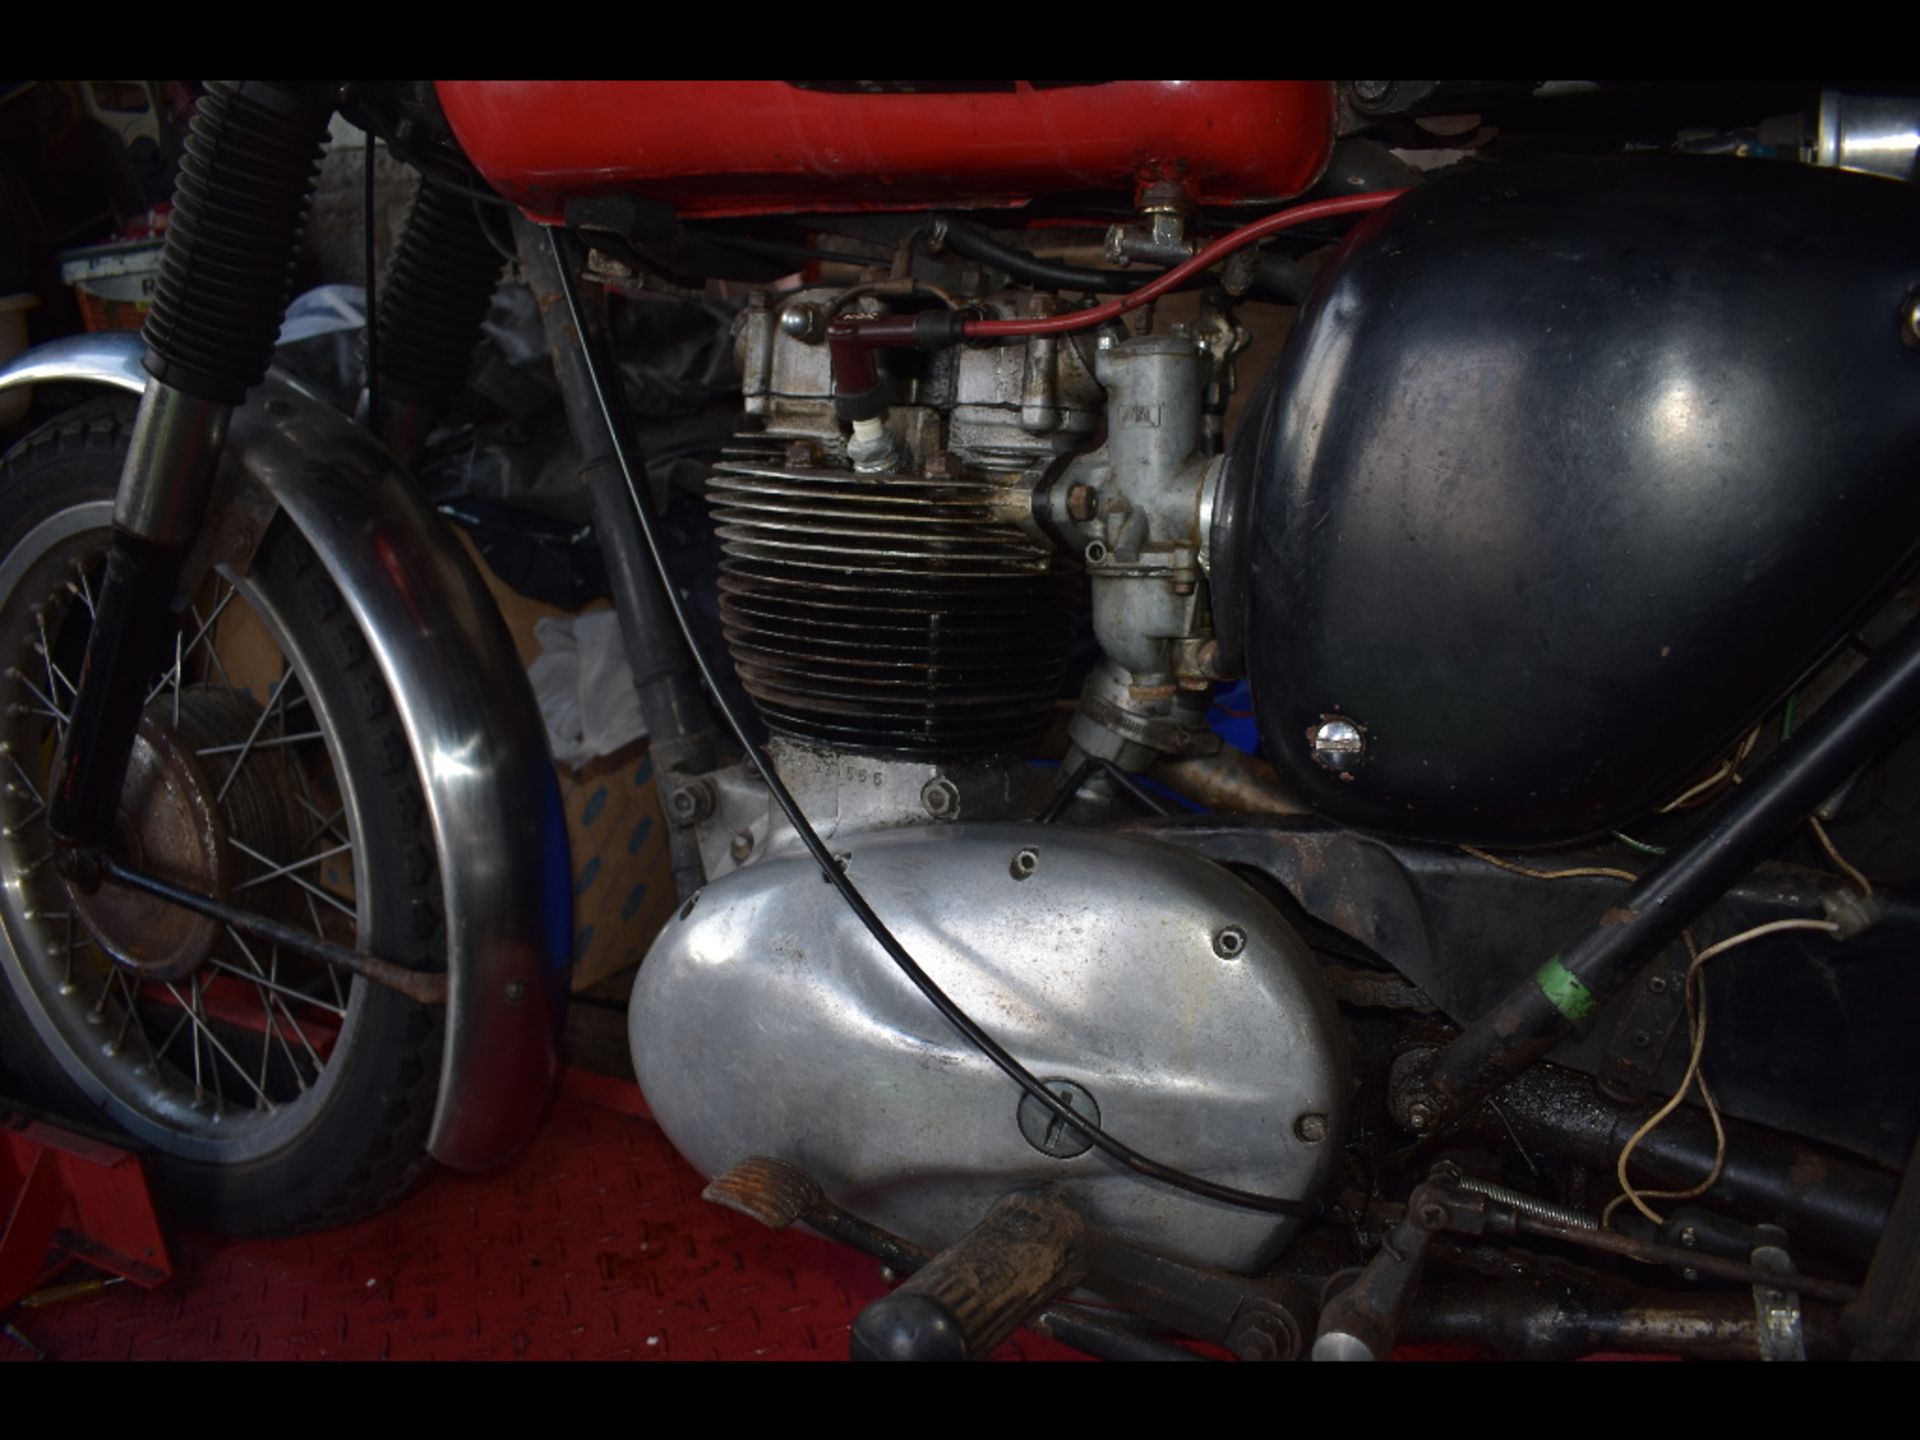 A 1964 BSA B40, registration number AHM 52B, frame number 2780, engine number SS555. From a - Image 2 of 6